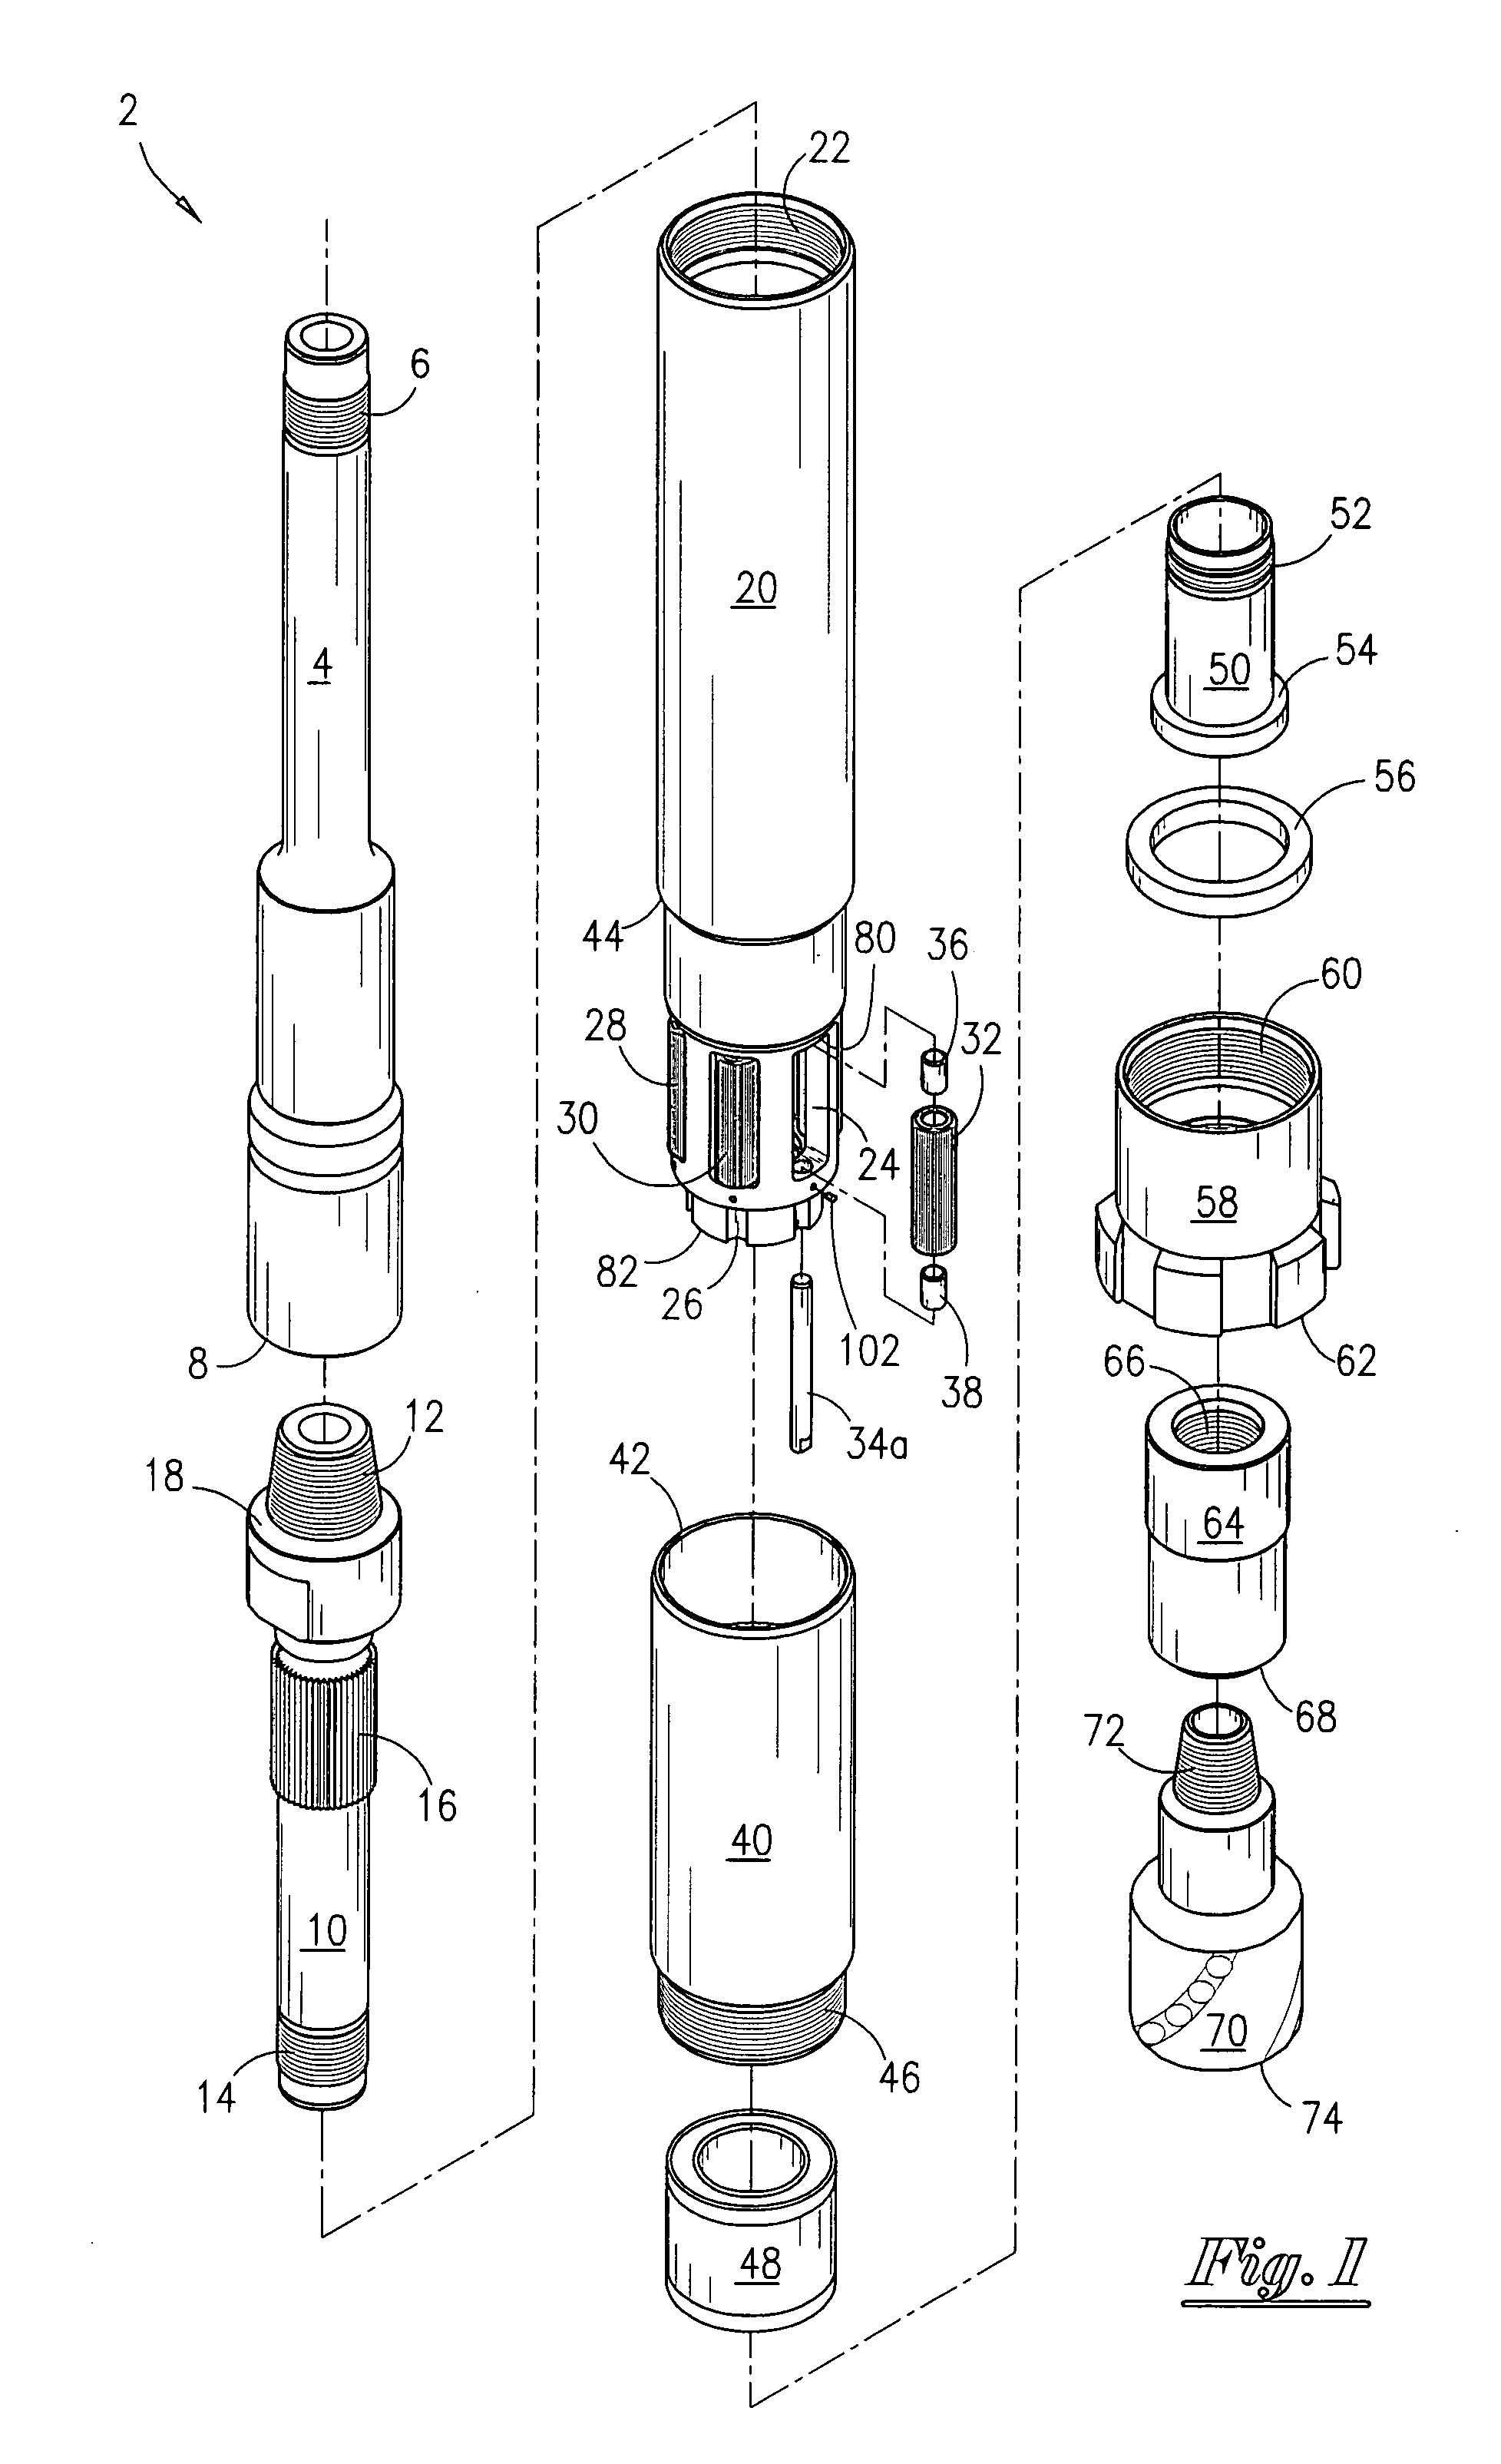 Drilling apparatus and system for drilling wells